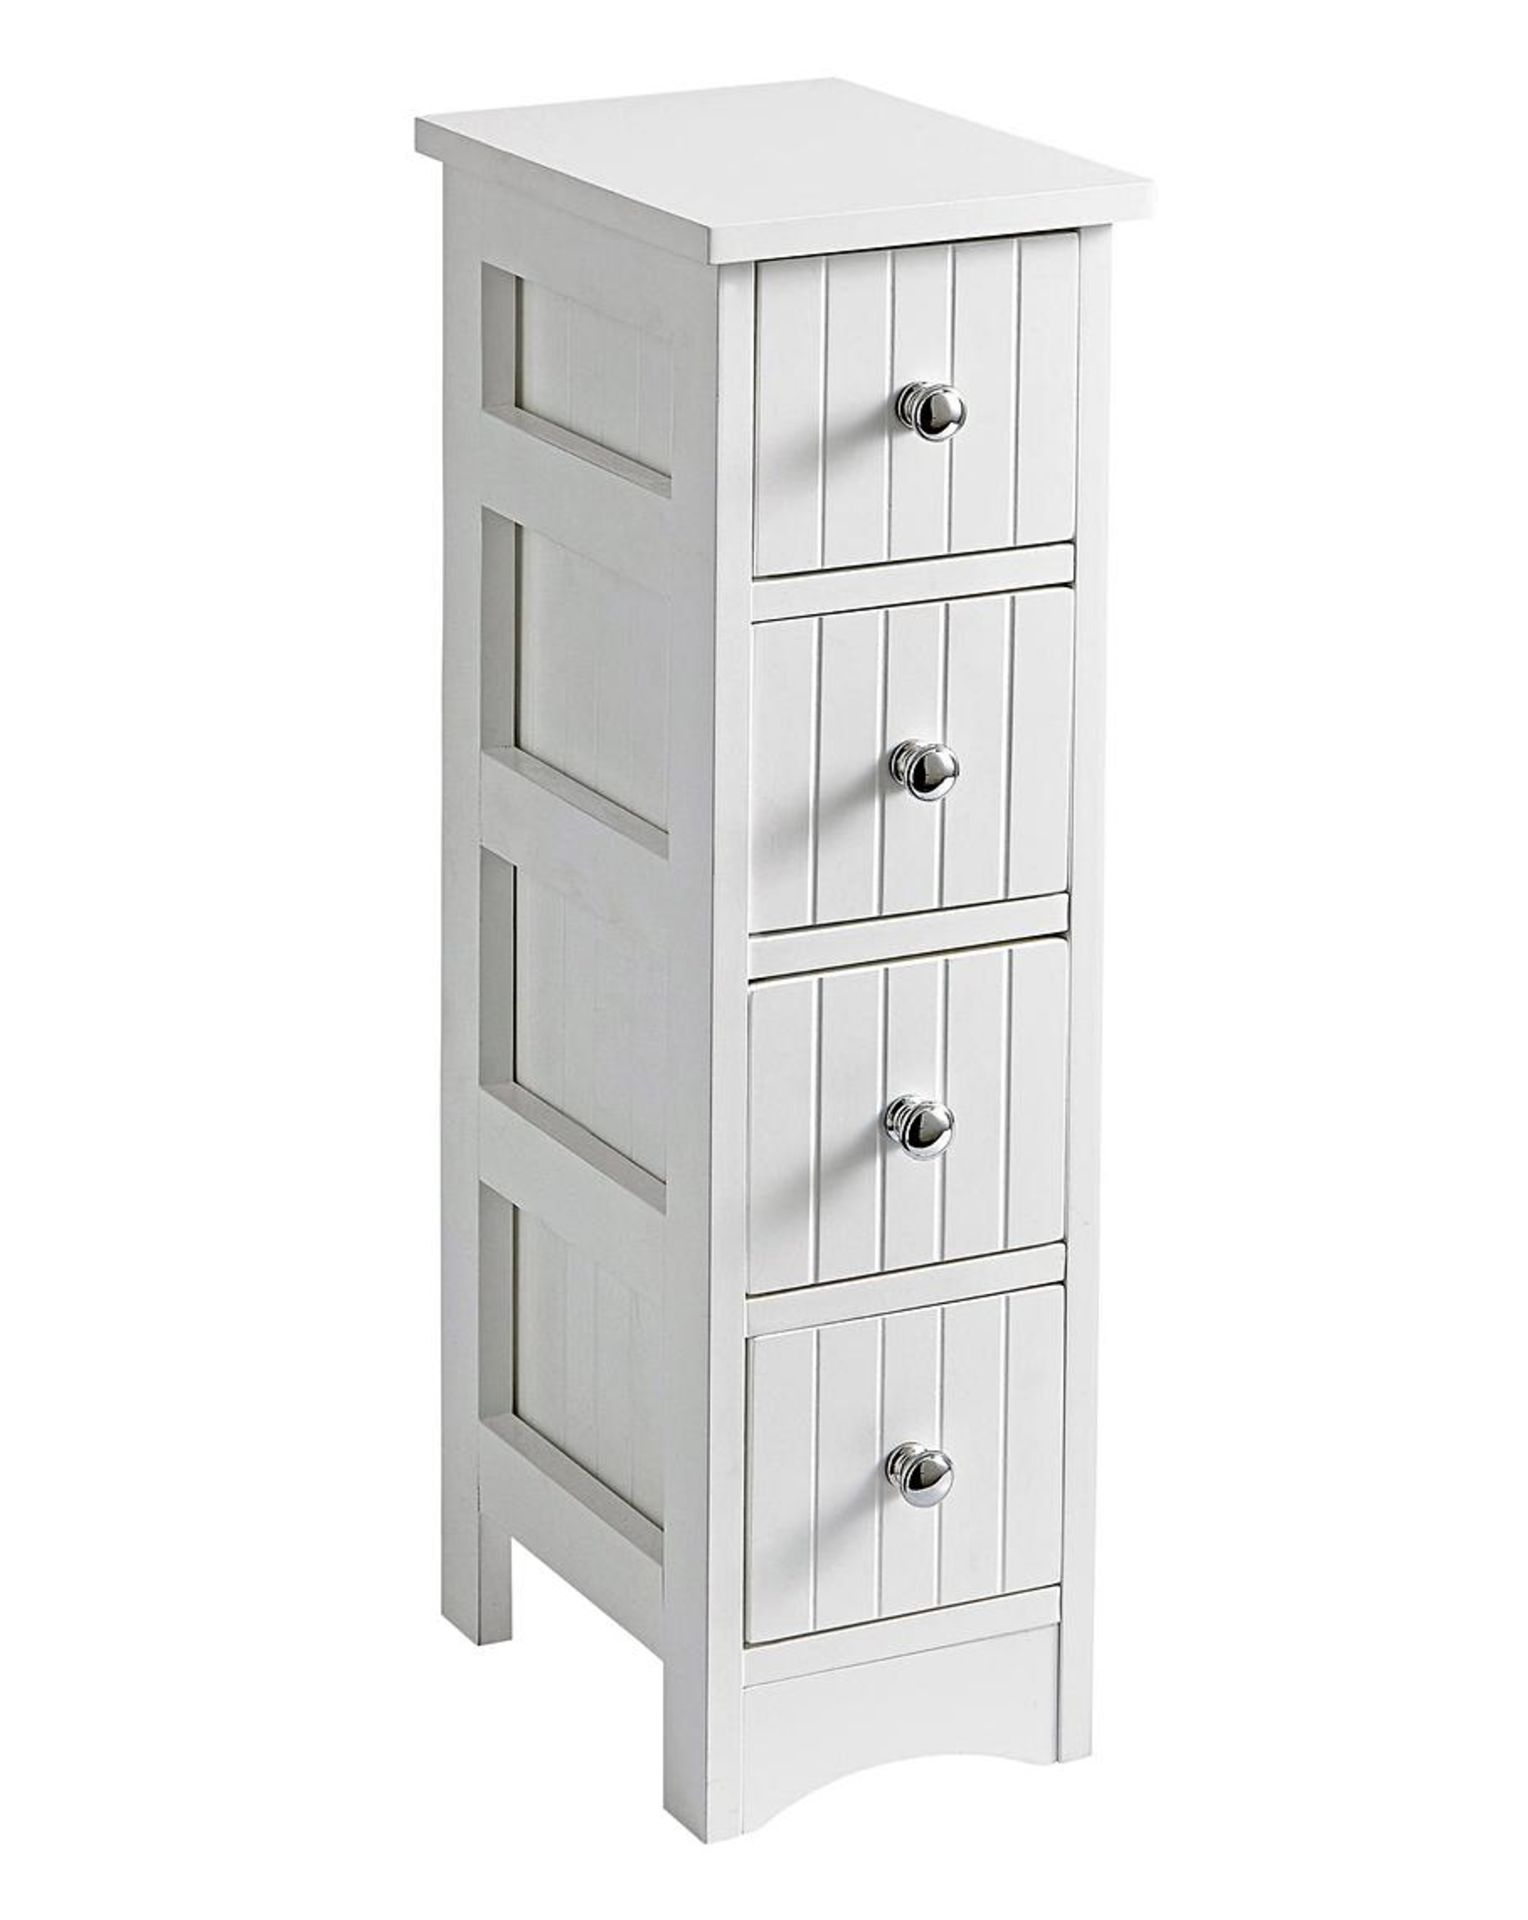 New England 4-Drawer Unit. - SR4. This cleverly designed slimline 4-drawer unit is ideal for